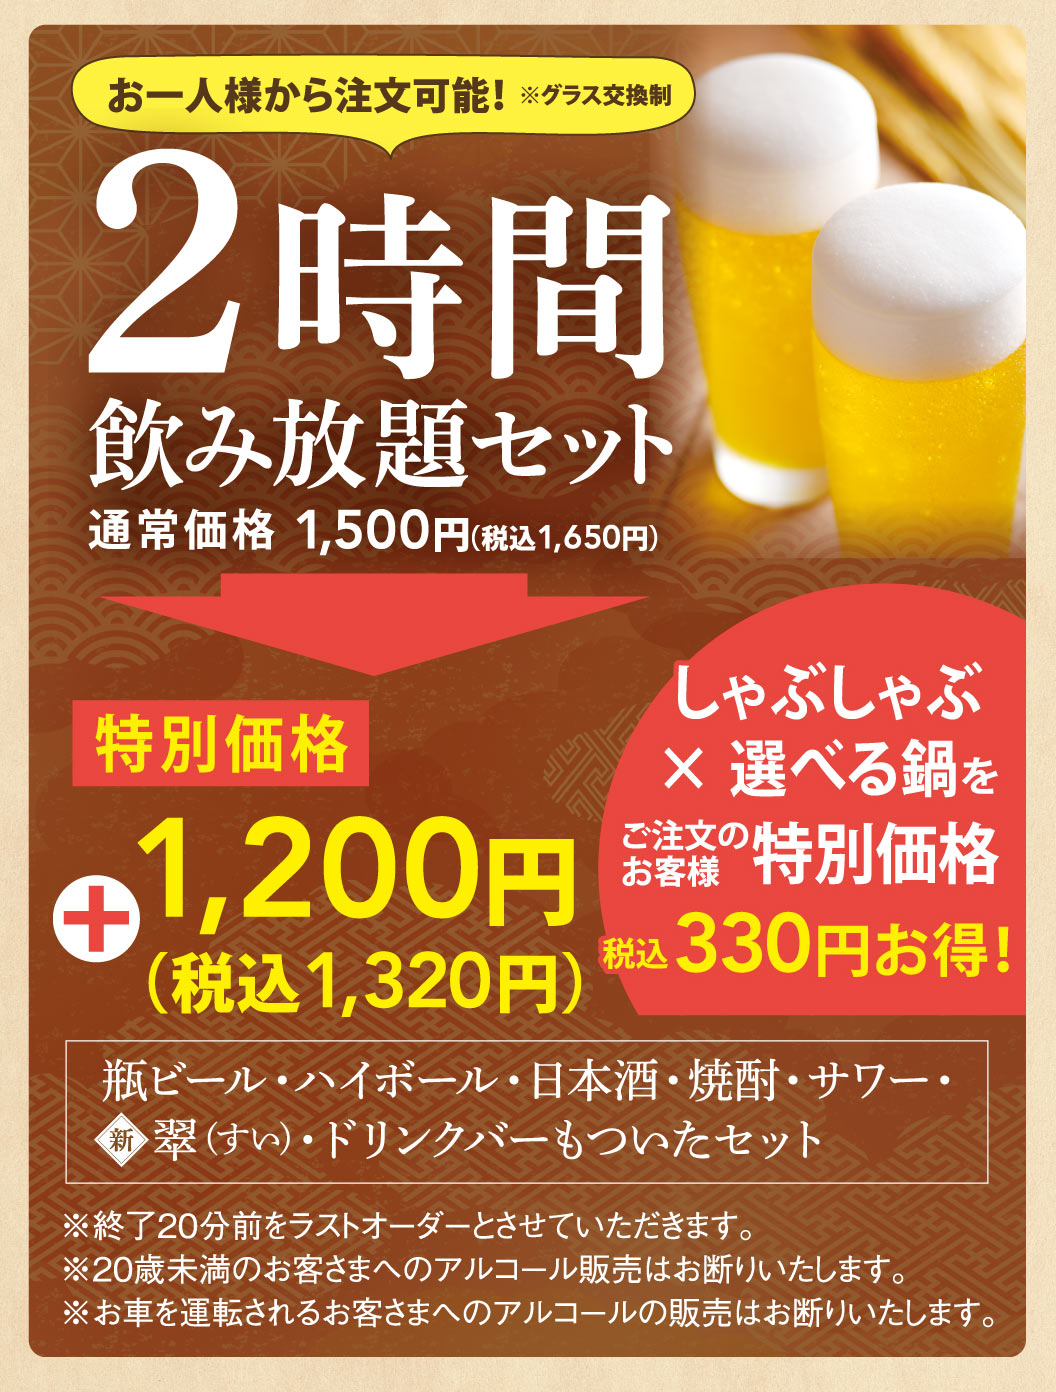 2-hour All-you-can-drink set